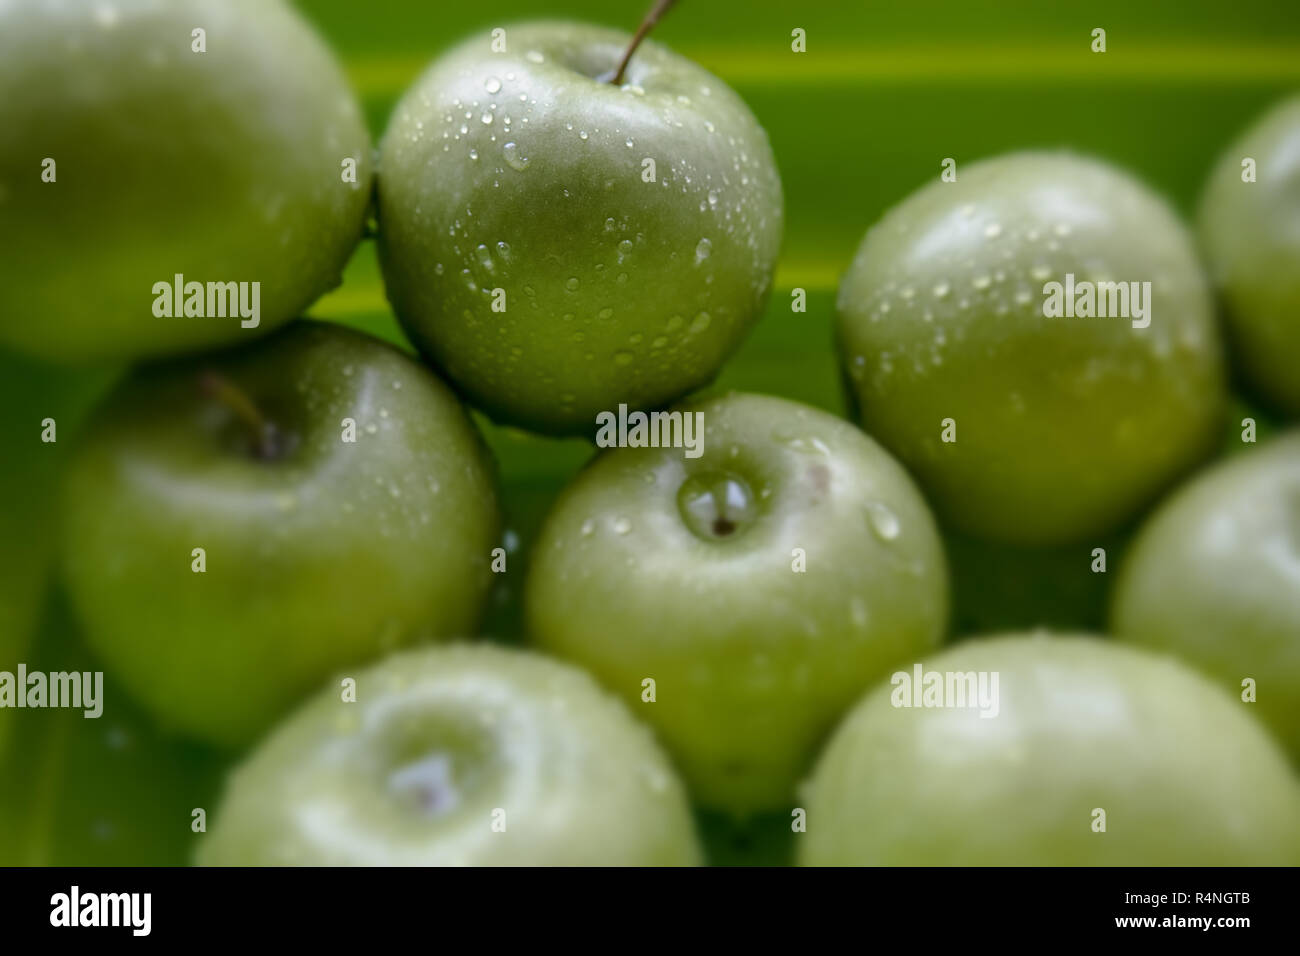 Green apples in a washing basket with water droplets on their skin. Stock Photo